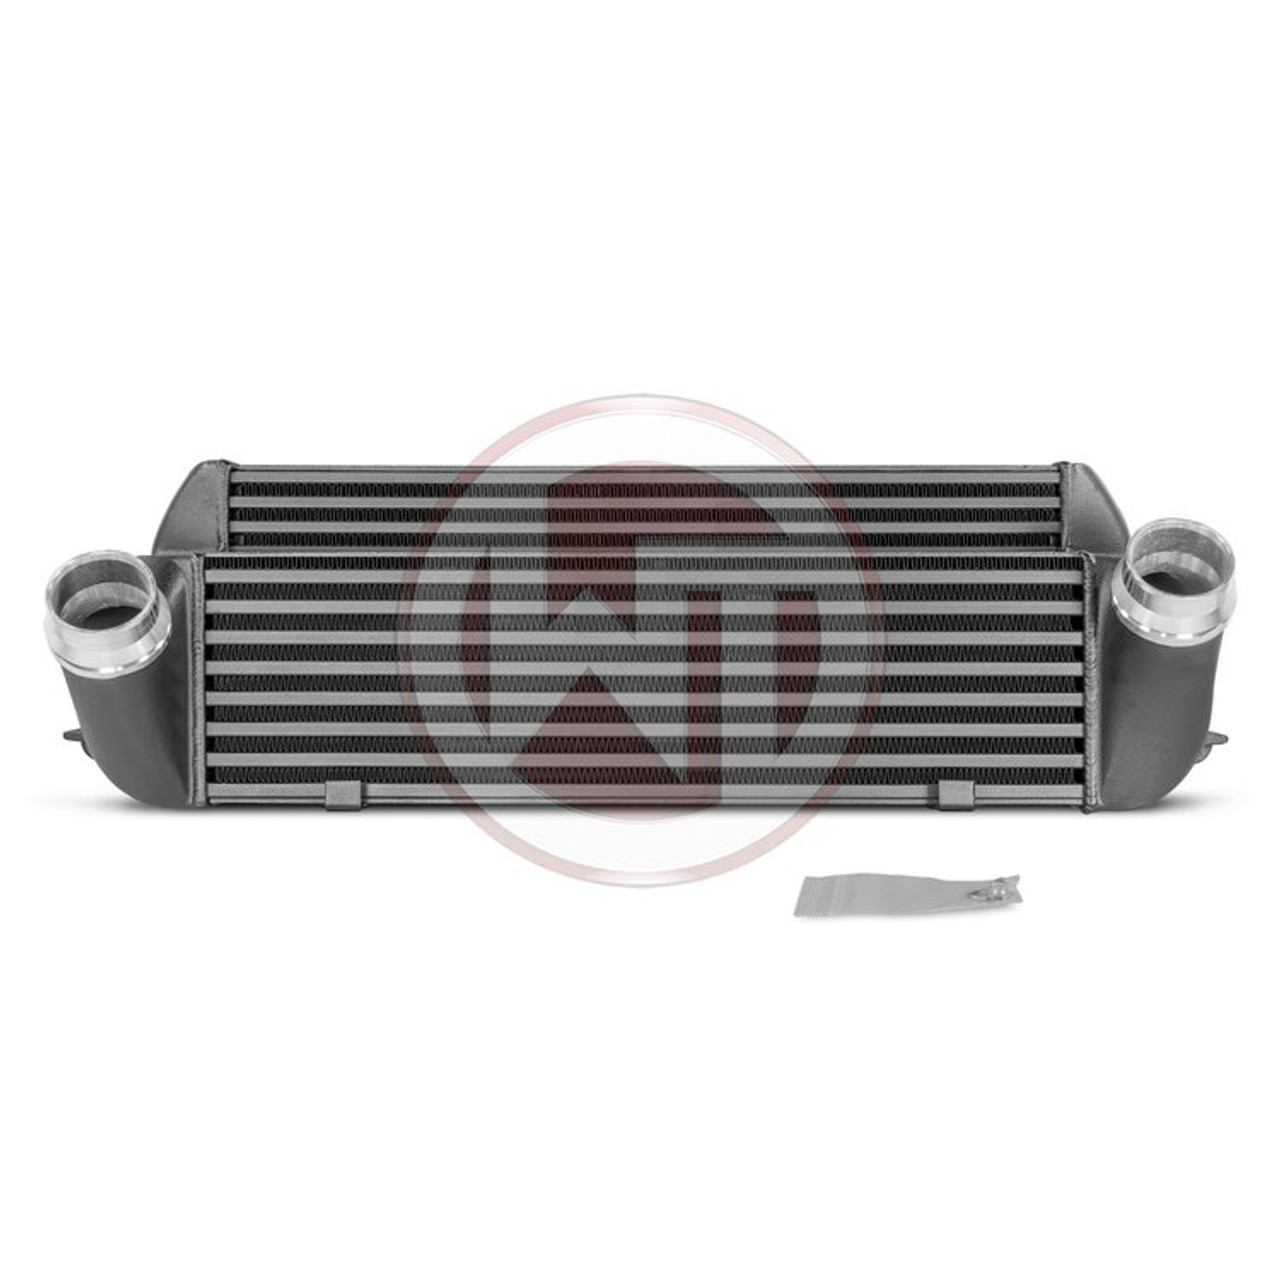 BMW Competition Intercooler Kit EVO 1 - Wagner Tuning 200001046 